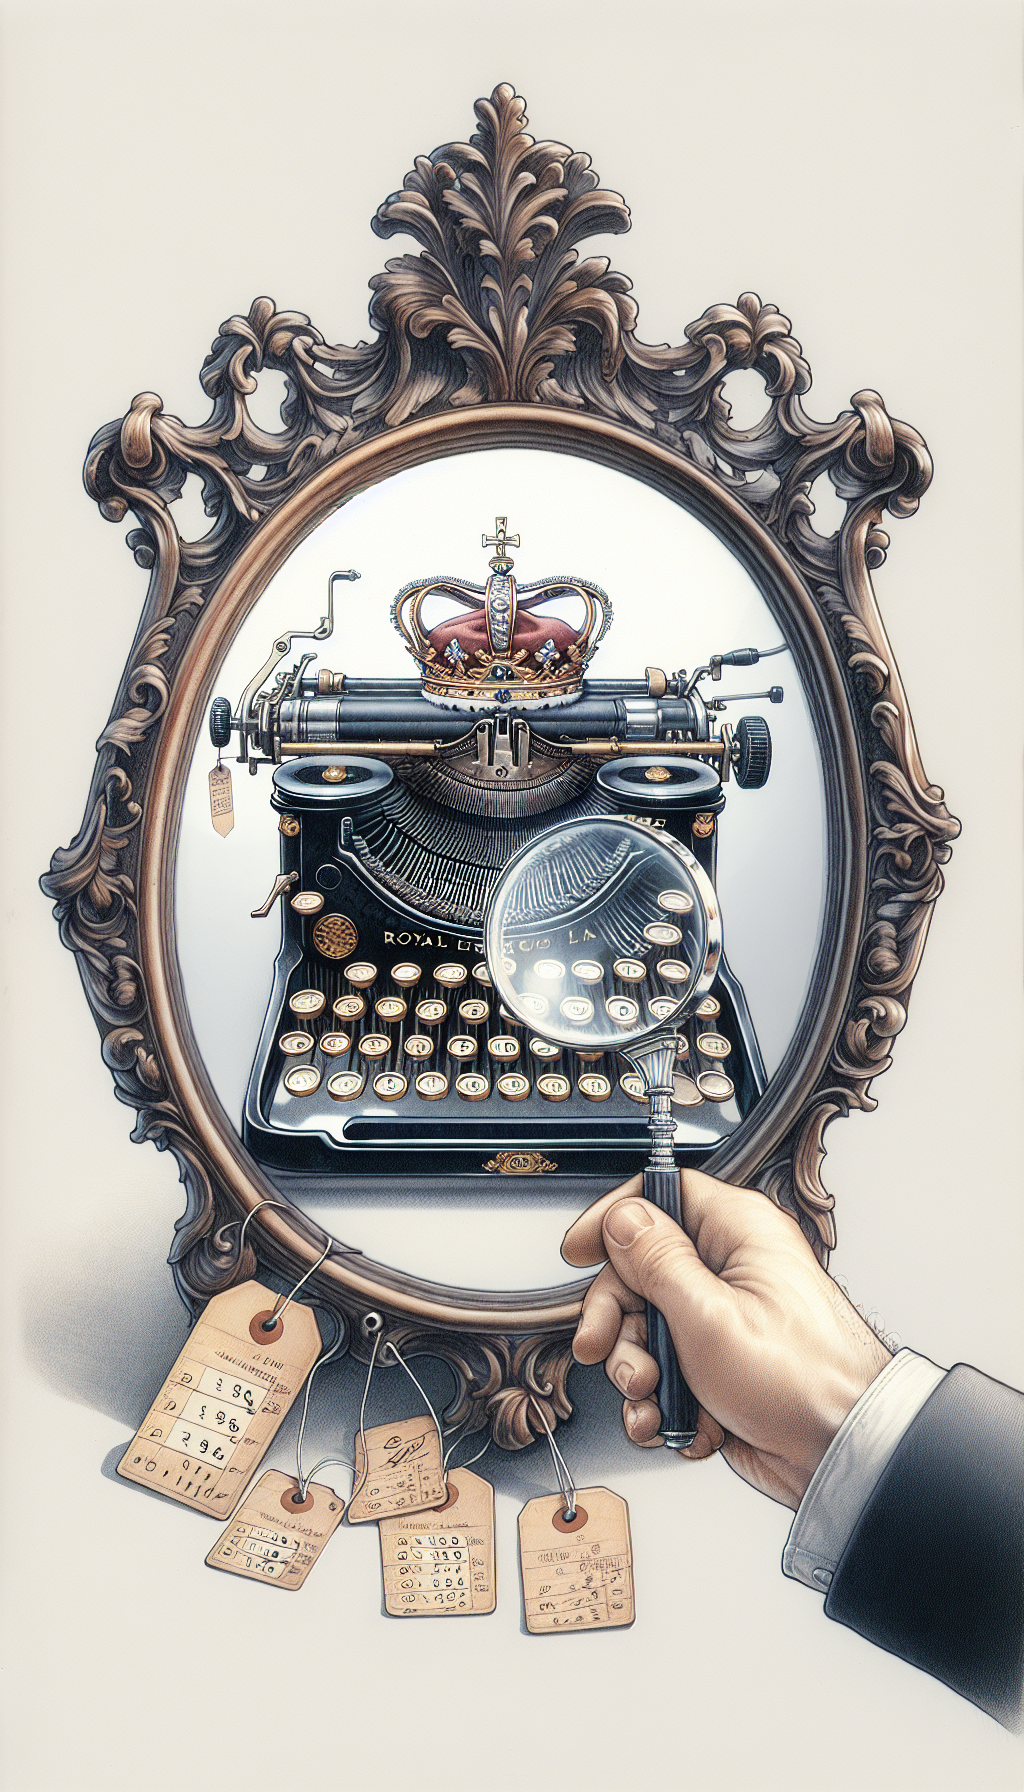 An ornate hand mirror reflects the image of a vintage Royal typewriter, with an expert's magnifying glass scrutinizing a tiny crown atop its keys. Price tags dangle from the carriage return lever, each inscribed with appraisal values. The contrasting styles—a watercolor mirror frame and a photorealistic typewriter—symbolize the blend of heritage and precise valuation.